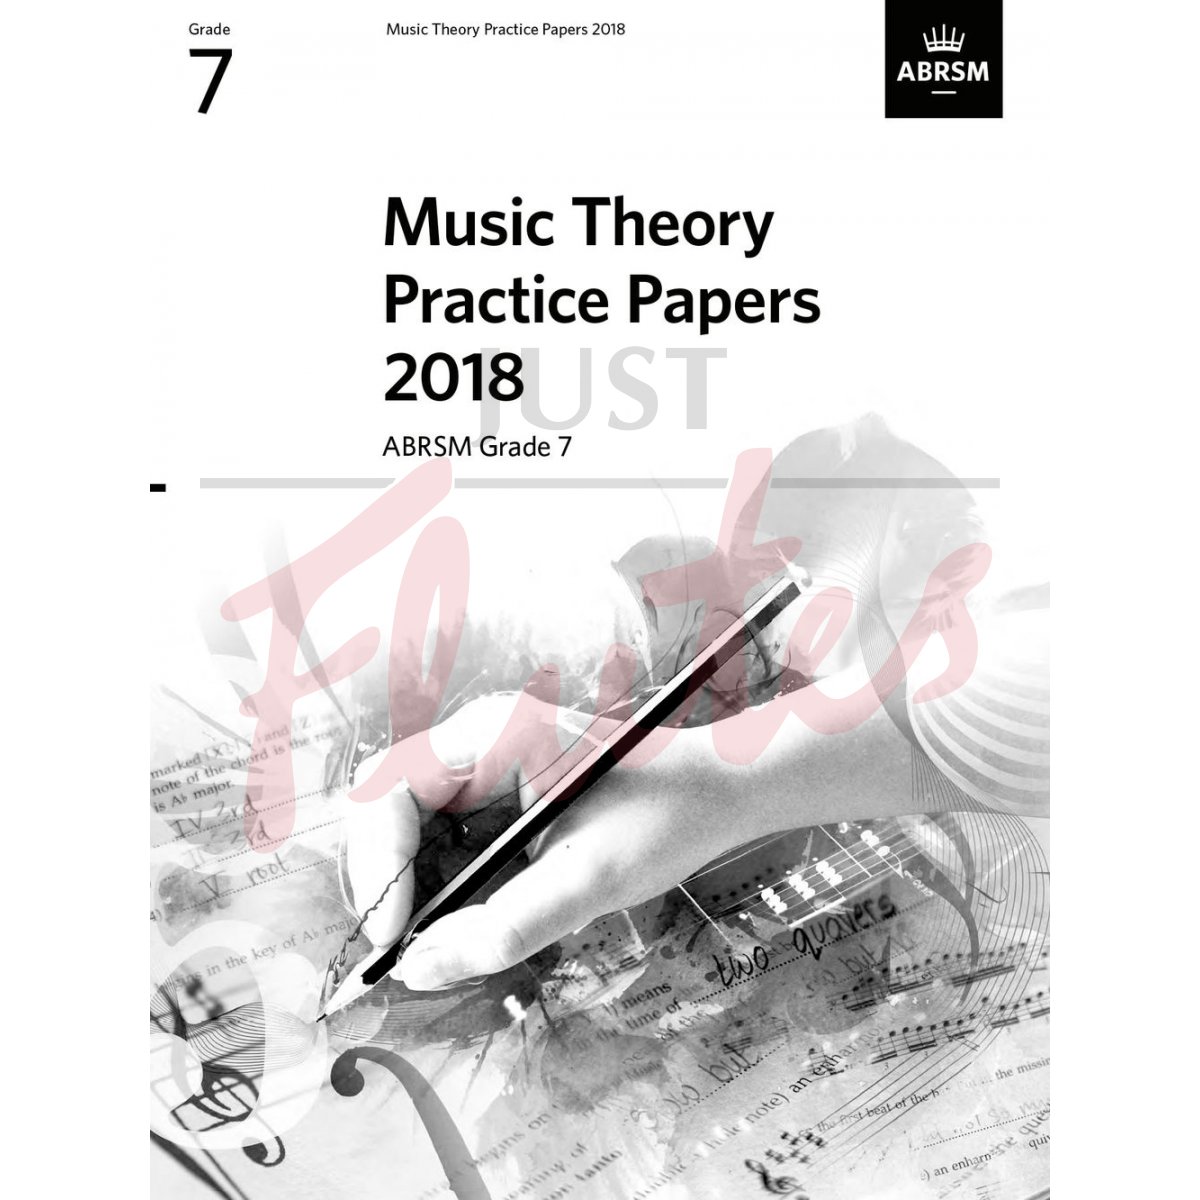 Music Theory Practice Papers 2018 Grade 7